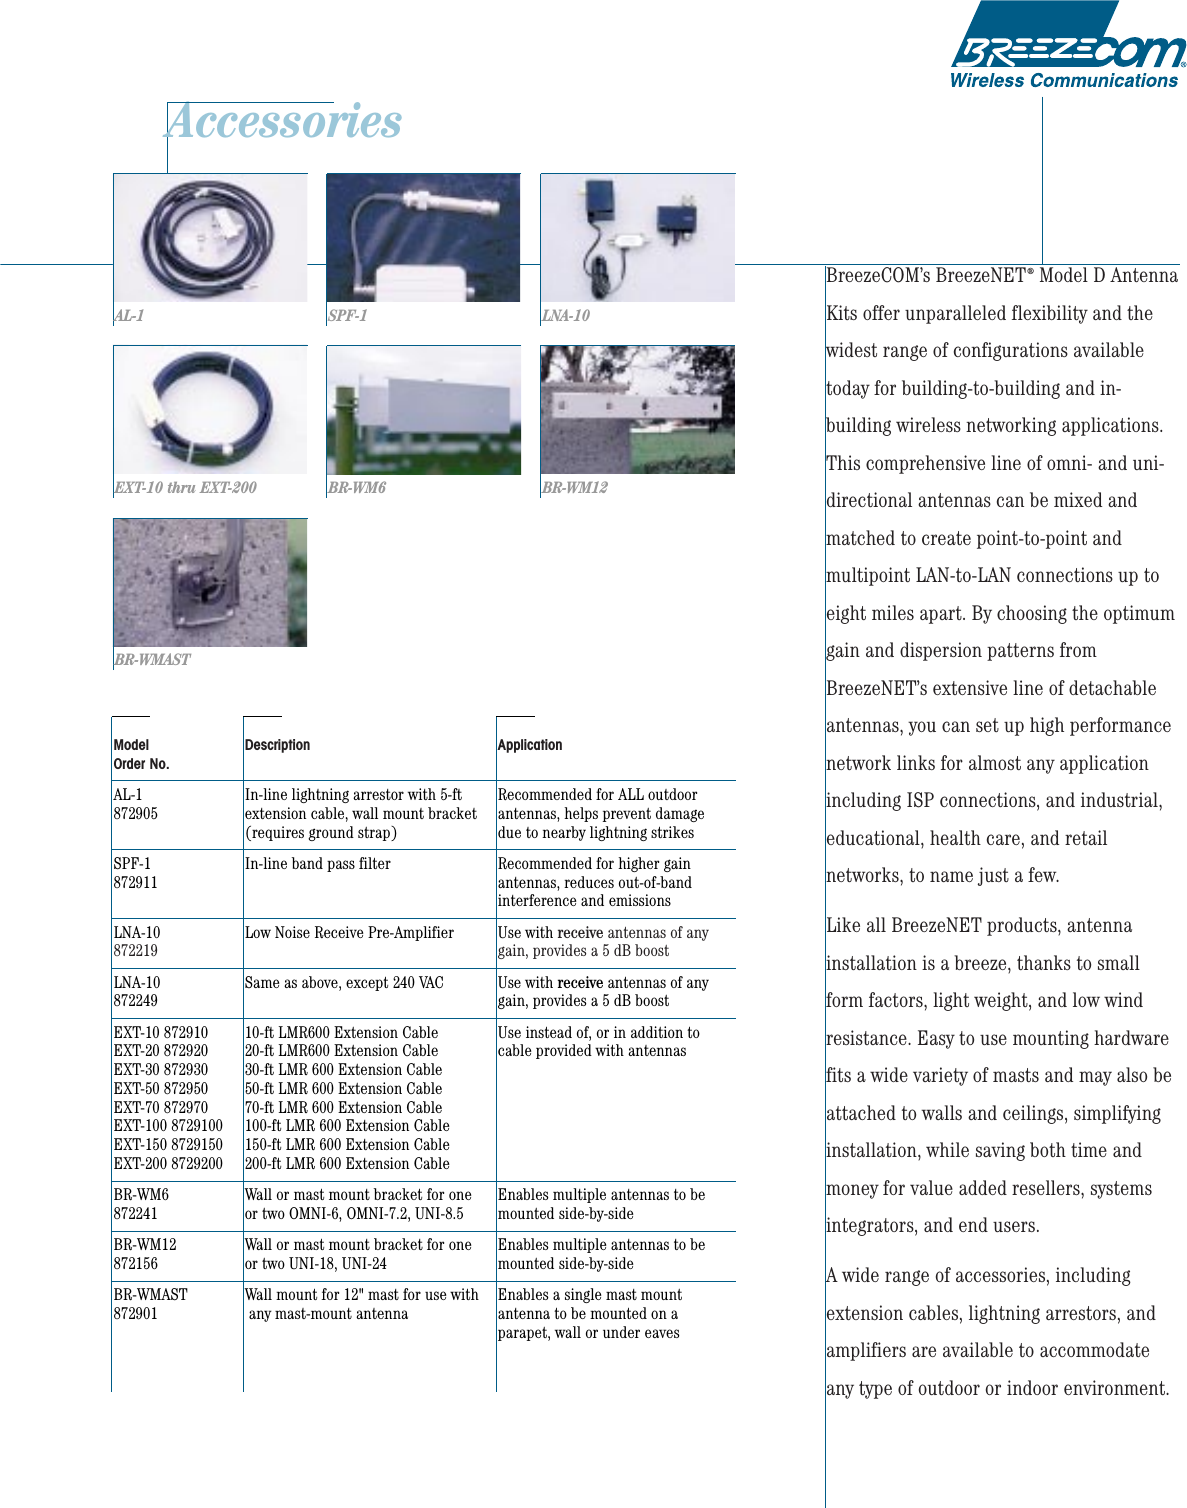 AccessoriesBreezeCOM’s BreezeNET®Model D AntennaKits offer unparalleled flexibility and thewidest range of configurations availabletoday for building-to-building and in-building wireless networking applications.This comprehensive line of omni- and uni-directional antennas can be mixed andmatched to create point-to-point andmultipoint LAN-to-LAN connections up toeight miles apart. By choosing the optimumgain and dispersion patterns fromBreezeNET’s extensive line of detachableantennas, you can set up high performancenetwork links for almost any applicationincluding ISP connections, and industrial,educational, health care, and retailnetworks, to name just a few.Like all BreezeNET products, antennainstallation is a breeze, thanks to smallform factors, light weight, and low windresistance. Easy to use mounting hardwarefits a wide variety of masts and may also beattached to walls and ceilings, simplifyinginstallation, while saving both time andmoney for value added resellers, systemsintegrators, and end users.A wide range of accessories, includingextension cables, lightning arrestors, andamplifiers are available to accommodateany type of outdoor or indoor environment.Model Description ApplicationOrder No.AL-1 In-line lightning arrestor with 5-ft   Recommended for ALL outdoor  872905 extension cable, wall mount bracket antennas, helps prevent damage(requires ground strap) due to nearby lightning strikesSPF-1 In-line band pass filter Recommended for higher gain872911 antennas, reduces out-of-bandinterference and emissionsLNA-10  Low Noise Receive Pre-Amplifier Use with receive antennas of any 872219 gain, provides a 5 dB boostLNA-10 Same as above, except 240 VAC Use with receive antennas of any 872249 gain, provides a 5 dB boostEXT-10 872910 10-ft LMR600 Extension Cable Use instead of, or in addition to EXT-20 872920 20-ft LMR600 Extension Cable cable provided with antennasEXT-30 872930 30-ft LMR 600 Extension CableEXT-50 872950 50-ft LMR 600 Extension CableEXT-70 872970 70-ft LMR 600 Extension CableEXT-100 8729100 100-ft LMR 600 Extension CableEXT-150 8729150 150-ft LMR 600 Extension CableEXT-200 8729200 200-ft LMR 600 Extension CableBR-WM6  Wall or mast mount bracket for one  Enables multiple antennas to be 872241 or two OMNI-6, OMNI-7.2, UNI-8.5 mounted side-by-sideBR-WM12  Wall or mast mount bracket for one Enables multiple antennas to be872156 or two UNI-18, UNI-24  mounted side-by-sideBR-WMAST  Wall mount for 12&quot; mast for use with Enables a single mast mount 872901 any mast-mount antenna antenna to be mounted on a parapet, wall or under eavesAL-1EXT-10 thru EXT-200SPF-1BR-WM6LNA-10BR-WM12BR-WMAST